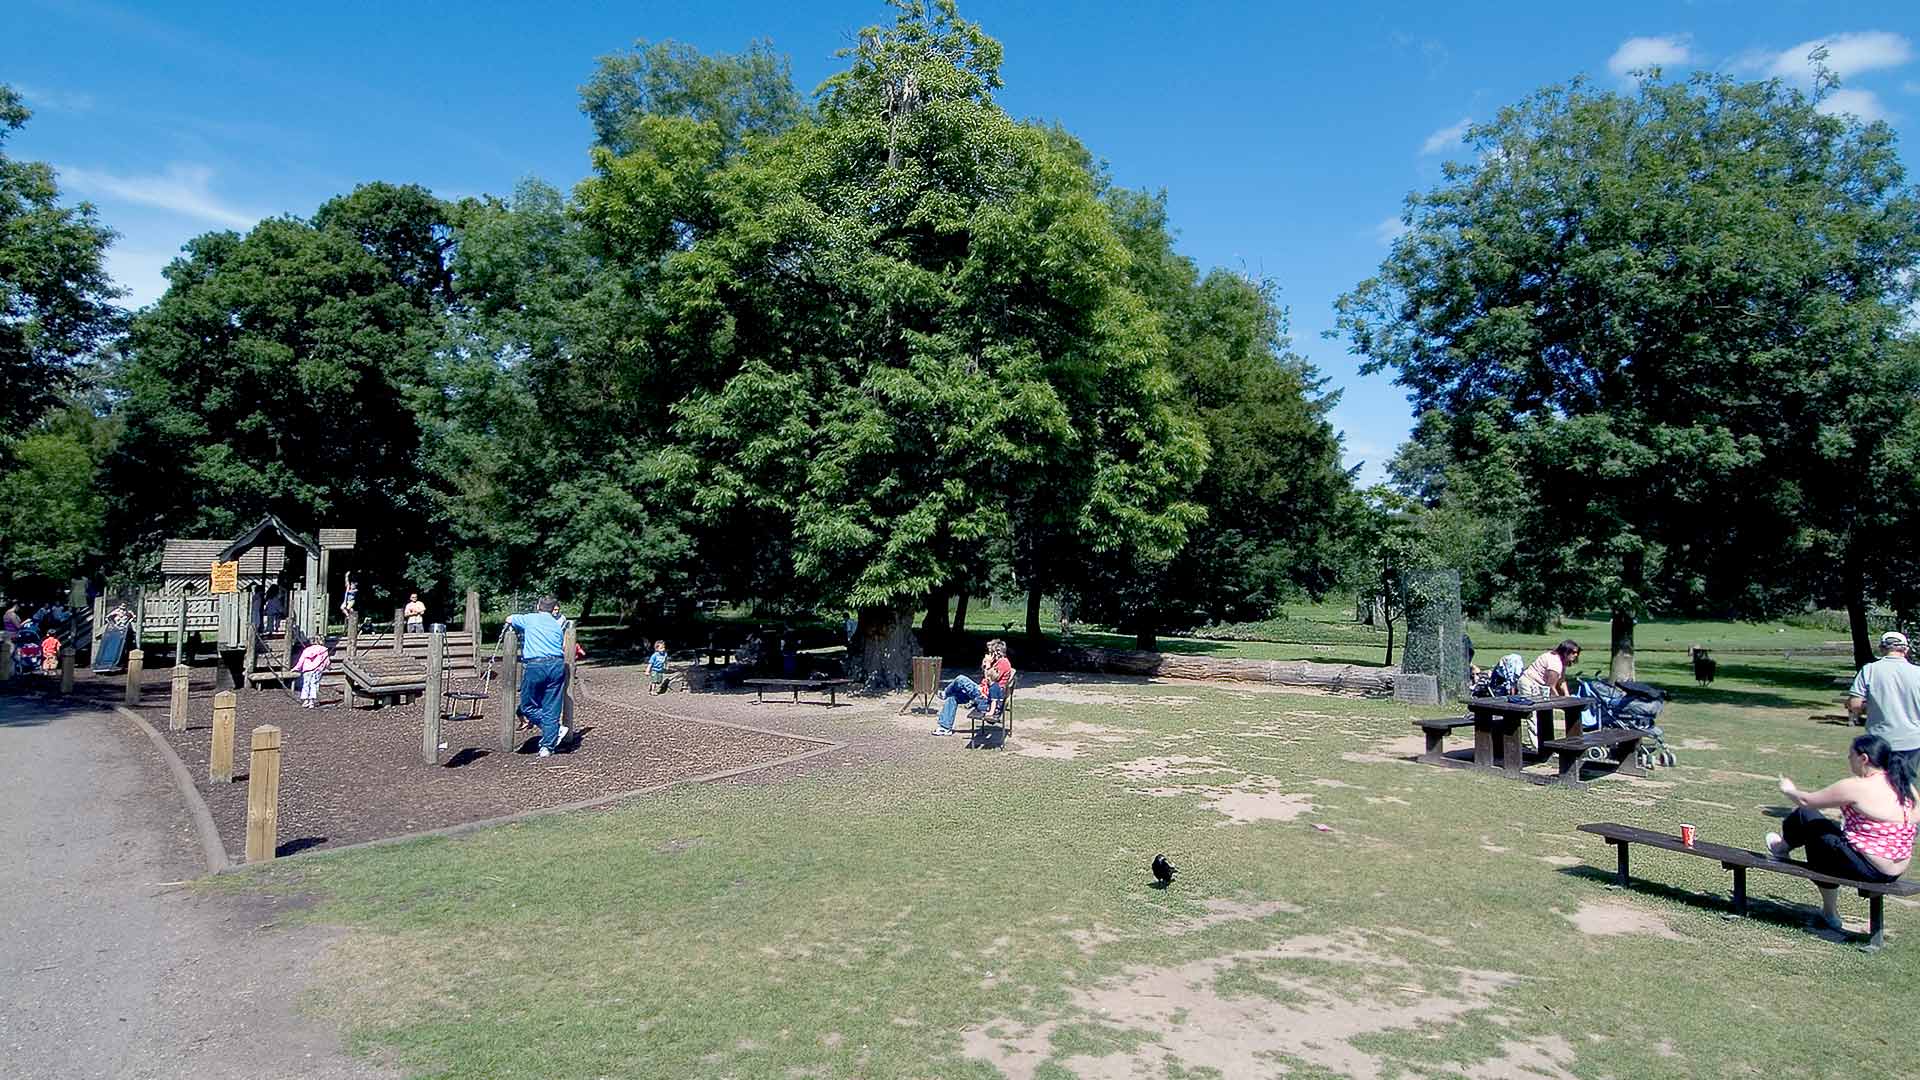 Families relaxing and children playing at Fota Island playground